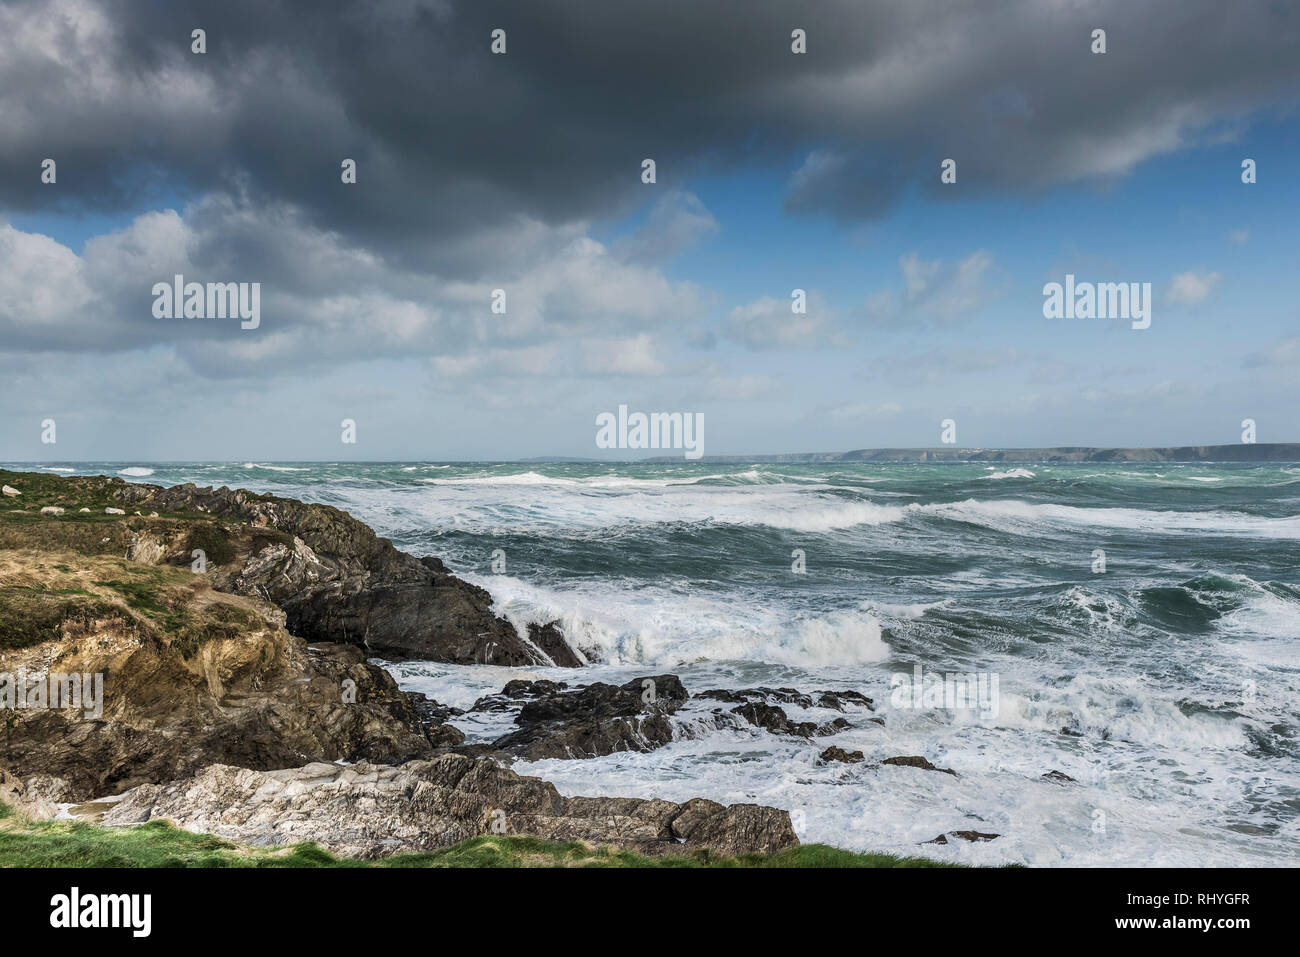 Rough sea and high winds around the coast of Newquay Cornwall. Stock Photo